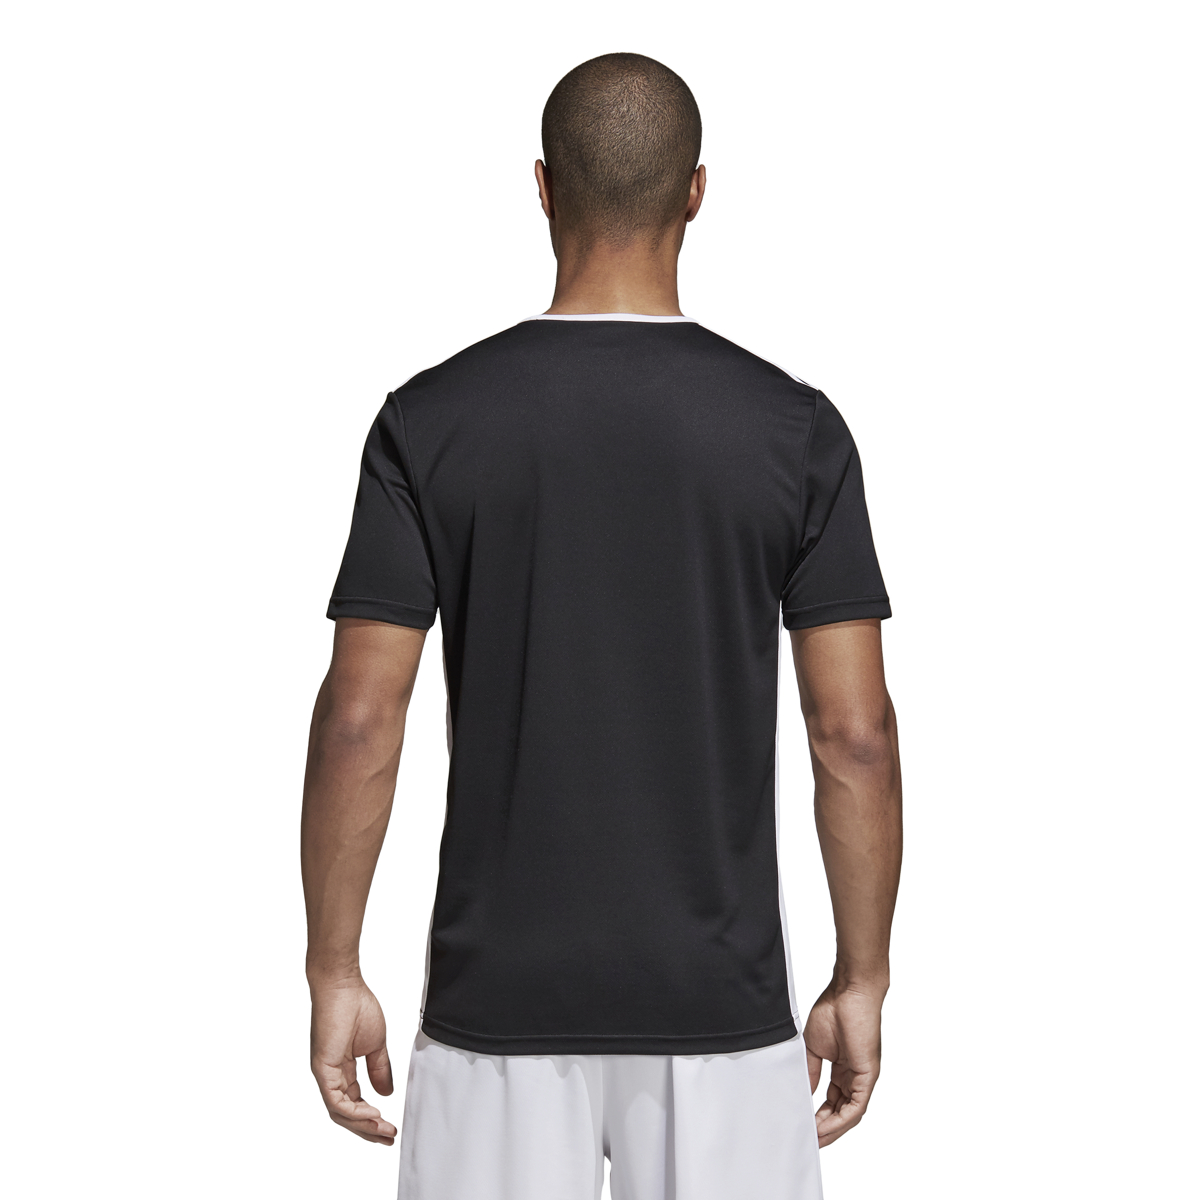 Adidas Men's Soccer Entrada 18 Jersey Adidas - Ships Directly From Adidas - image 2 of 6